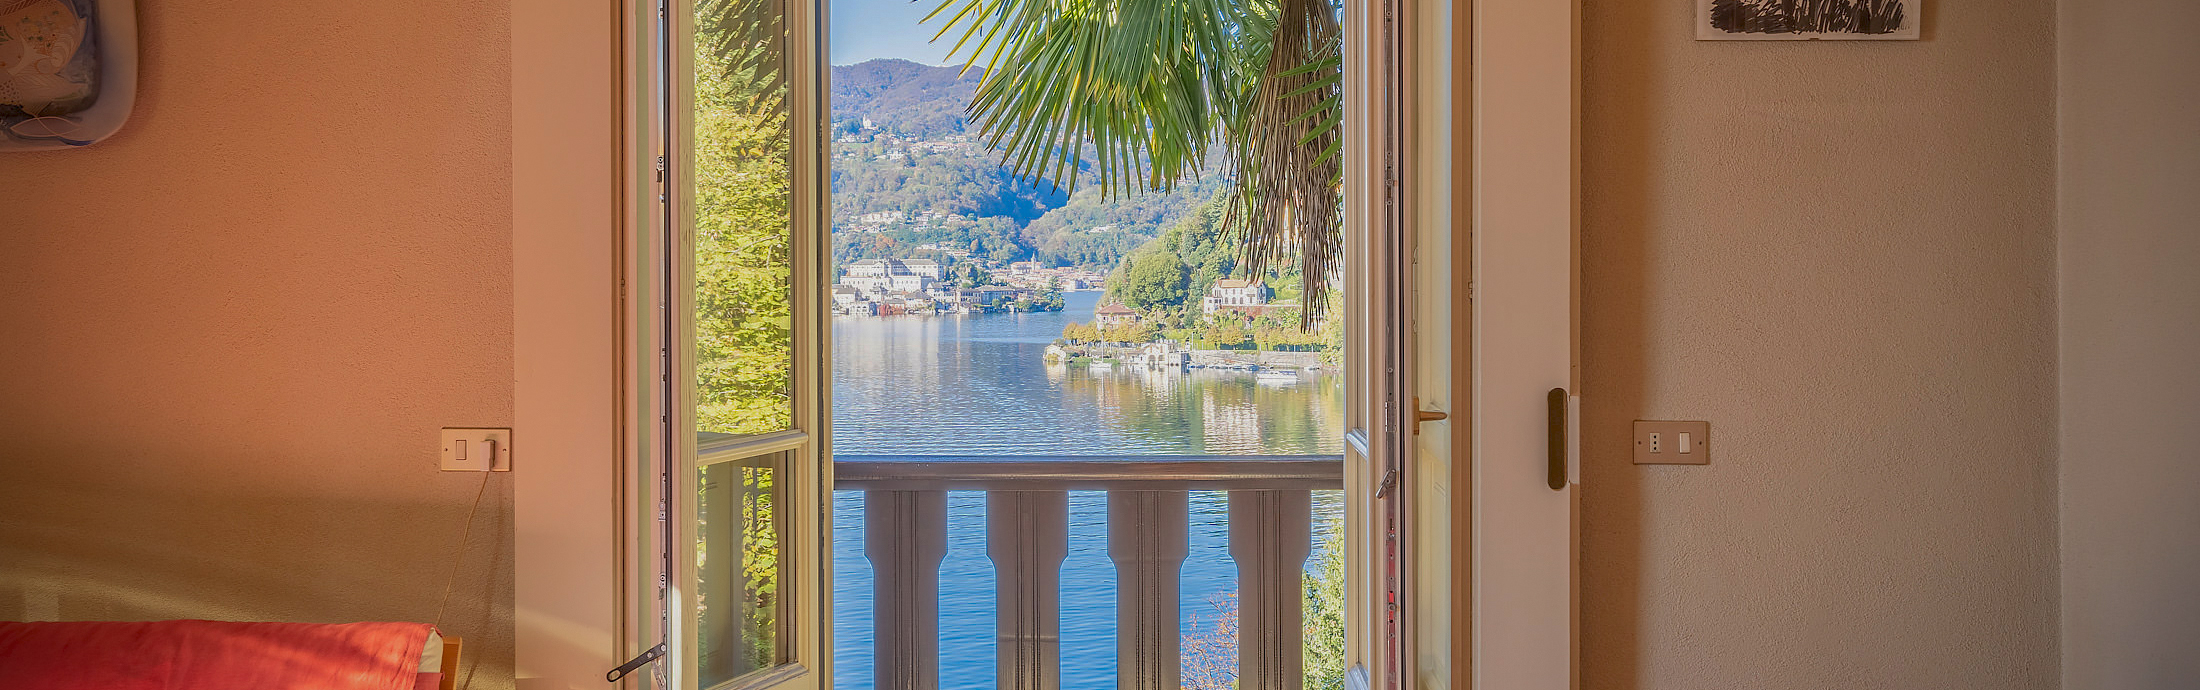 ORTA Apartment Island View, In Historic Villa With Secular Park And Dock